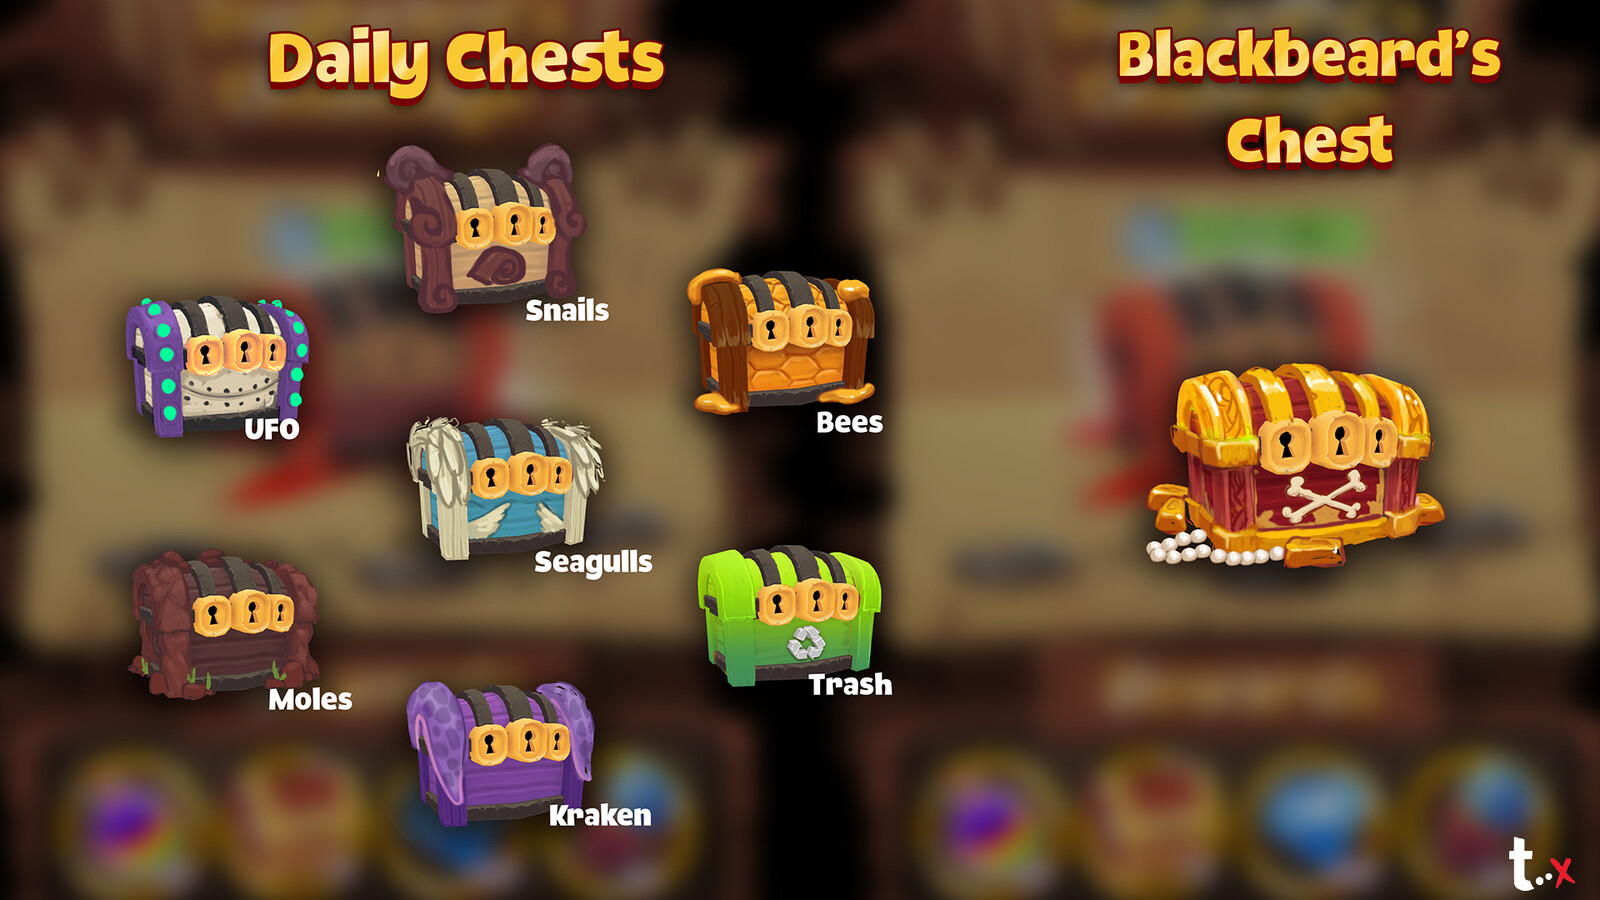 Concepts of themed chests for daily events.